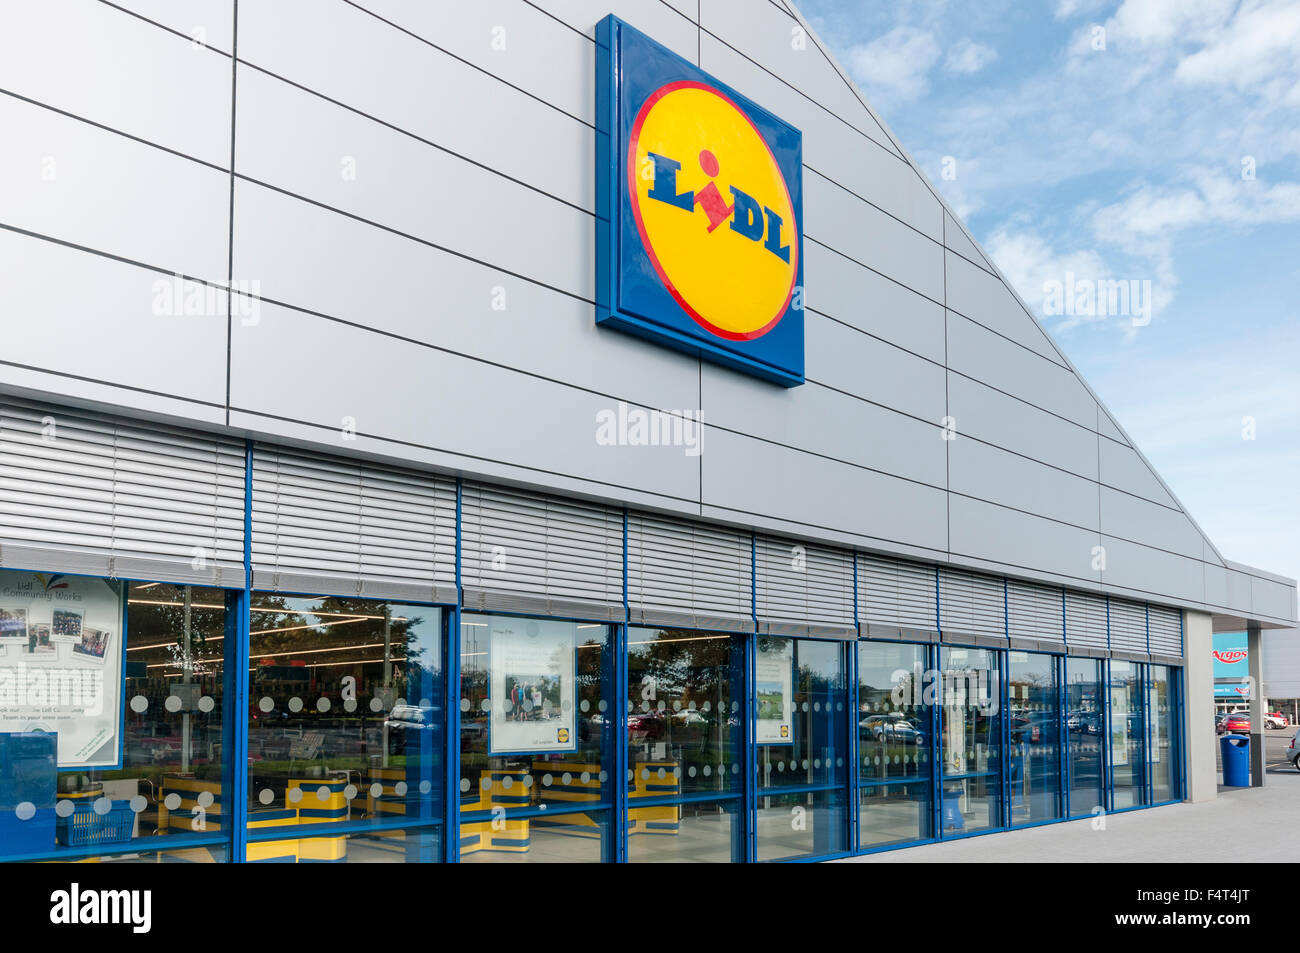 Lidl 'ditches plans' to launch online shopping and delivery in the